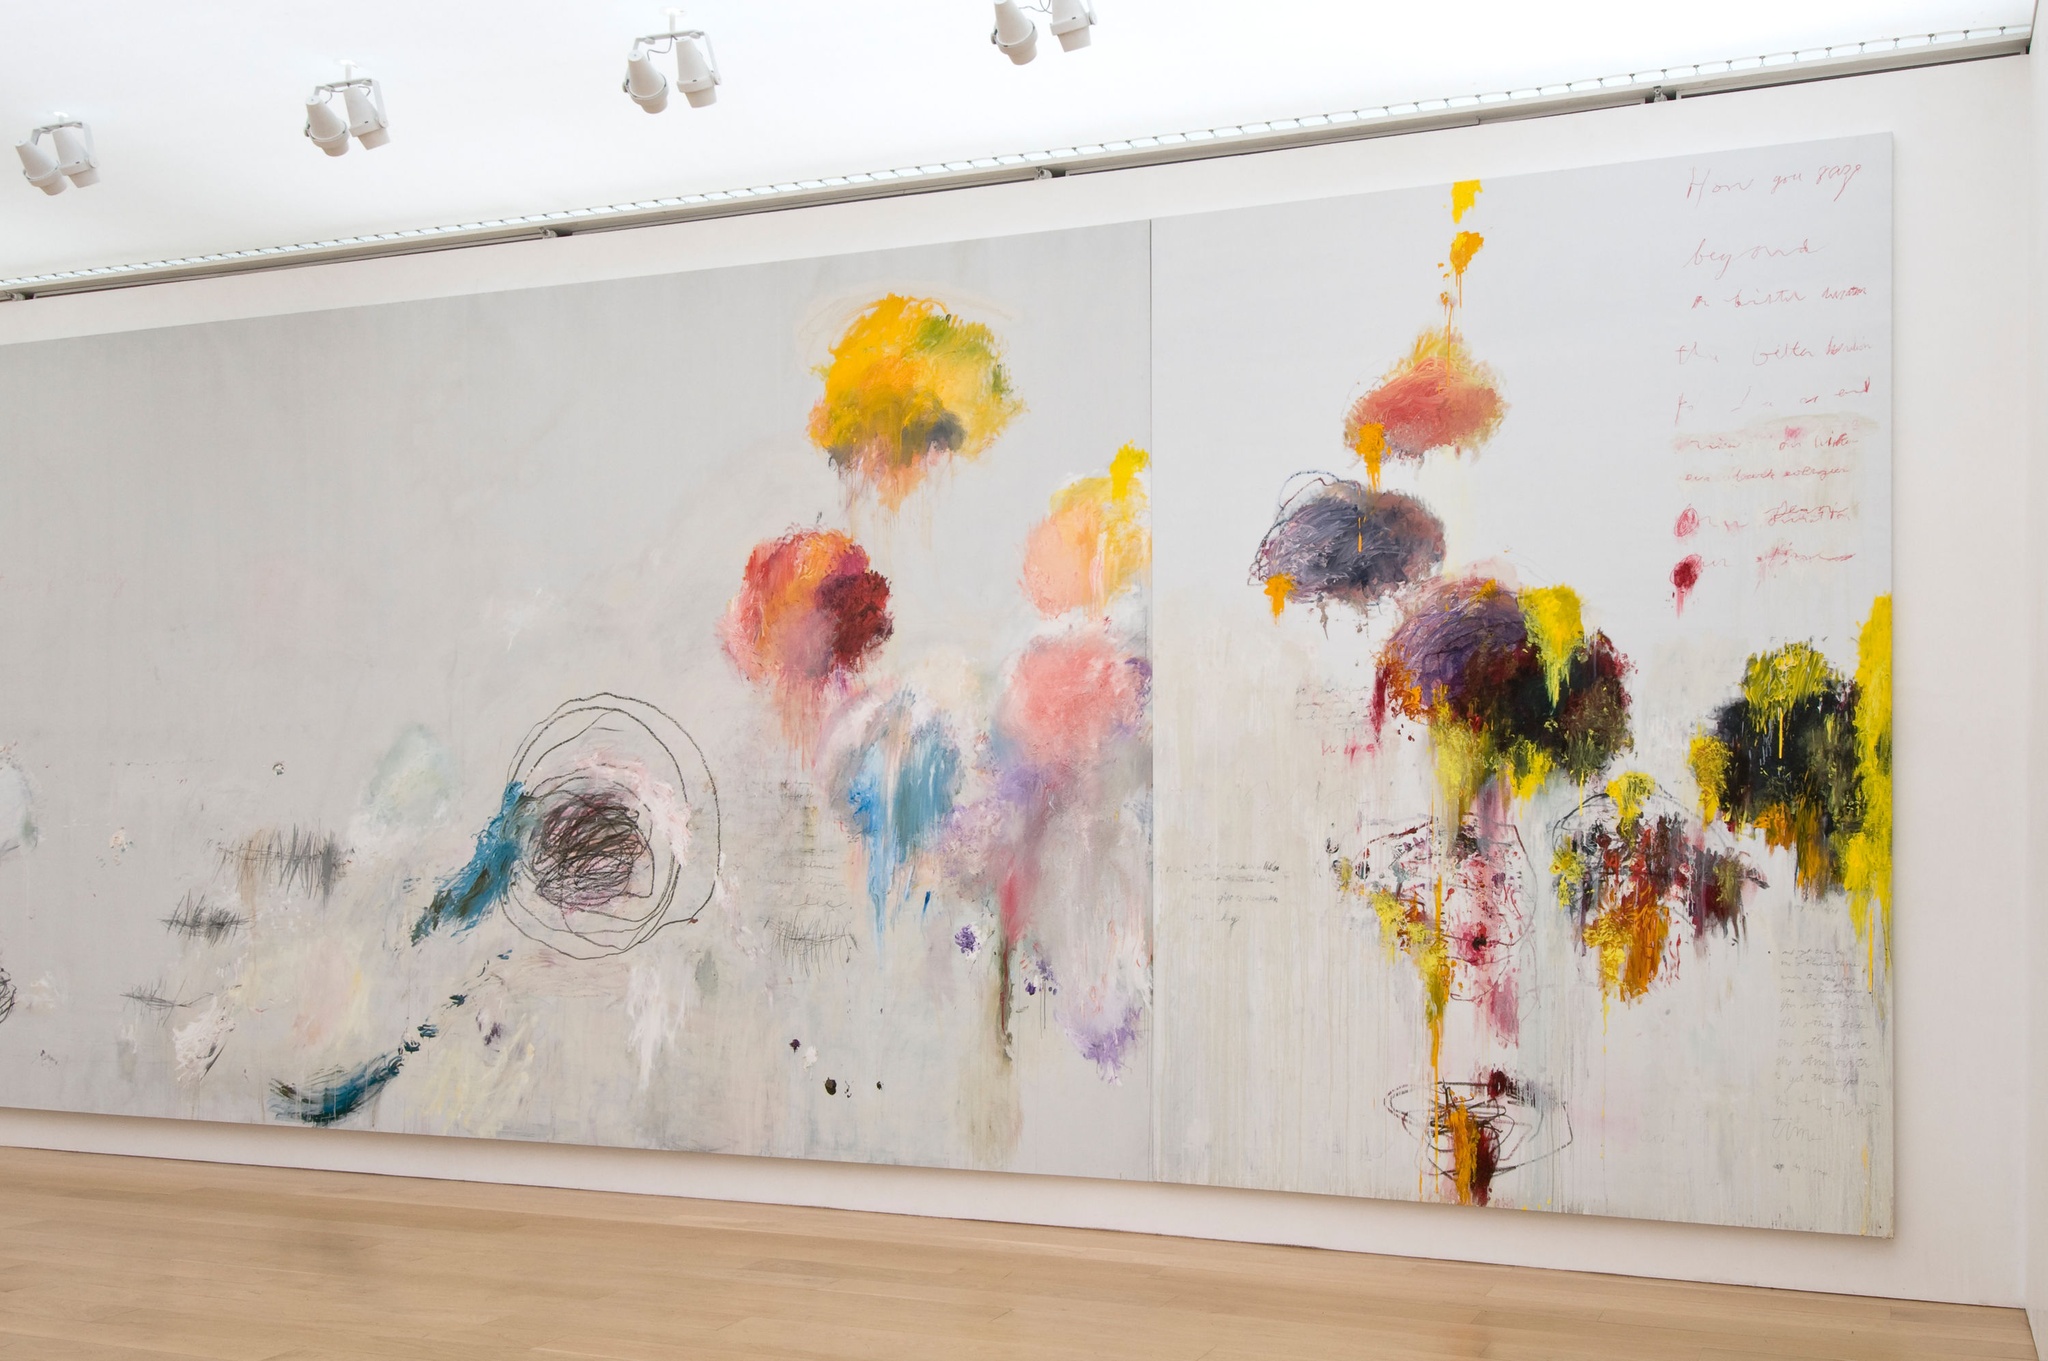 Curator Talk: Michelle White on Cy Twombly's “Unaltd (Say